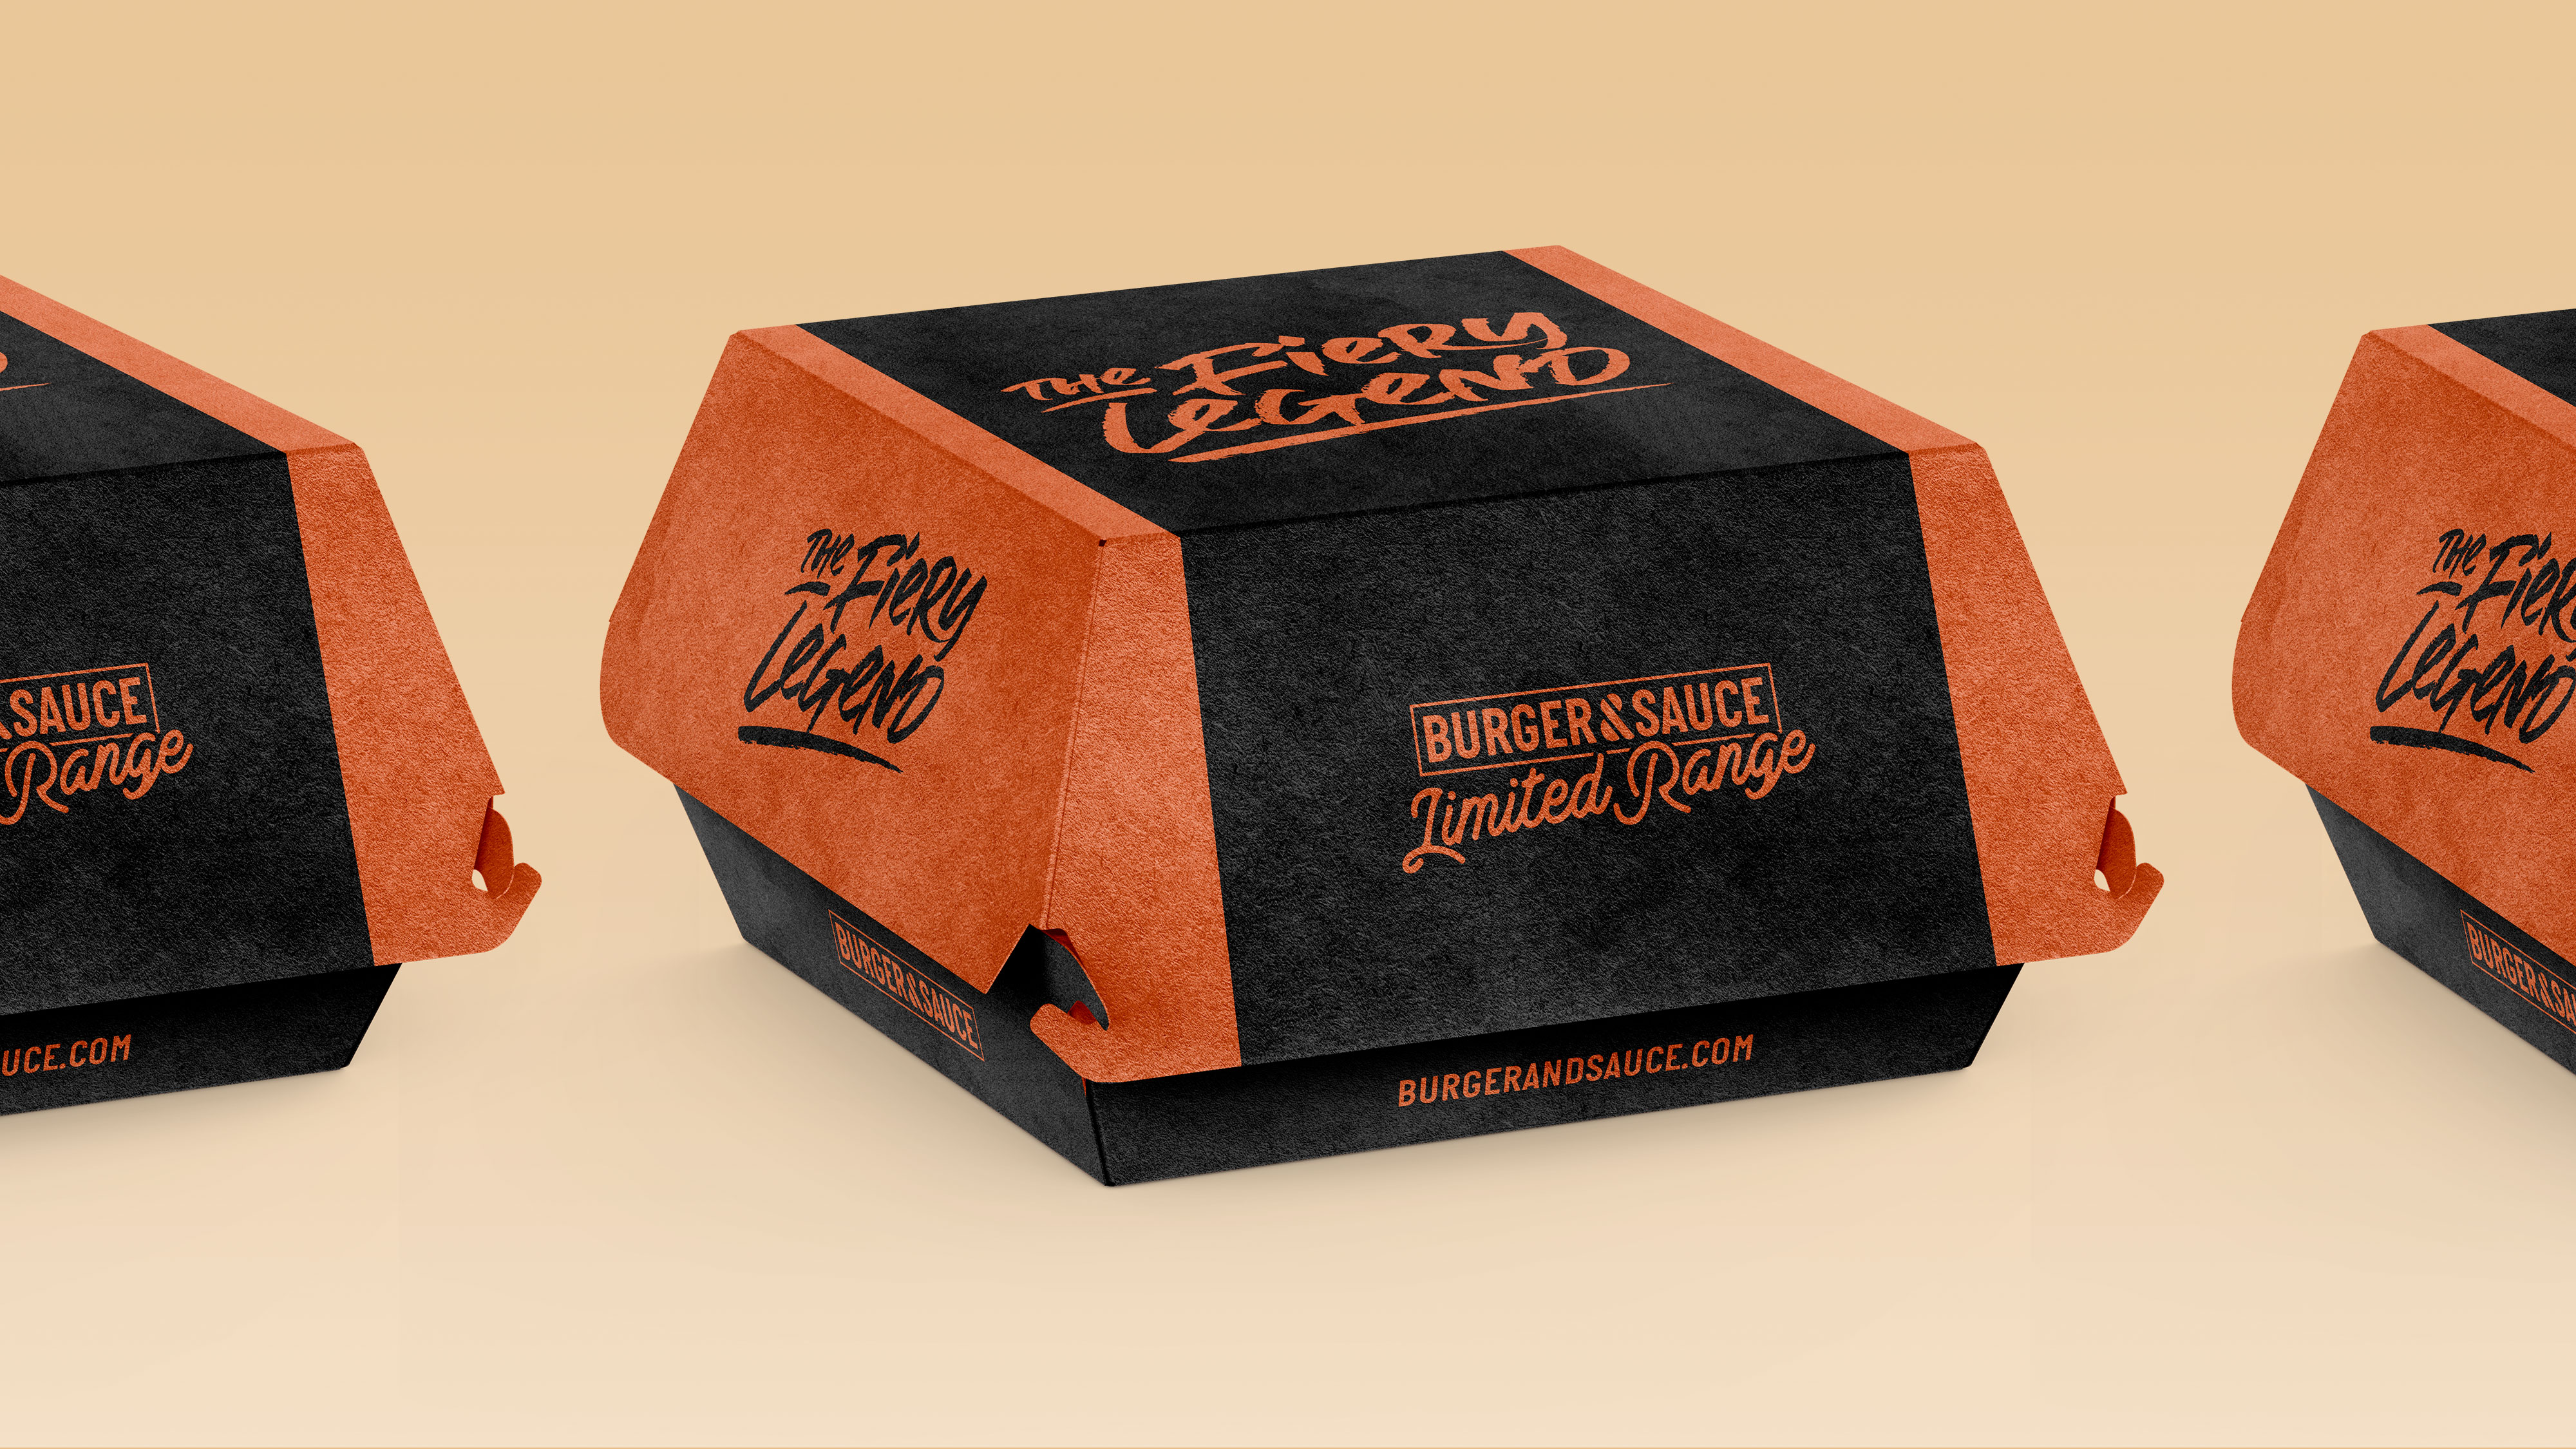 burger and sauce packaging fiery legend 4 v1